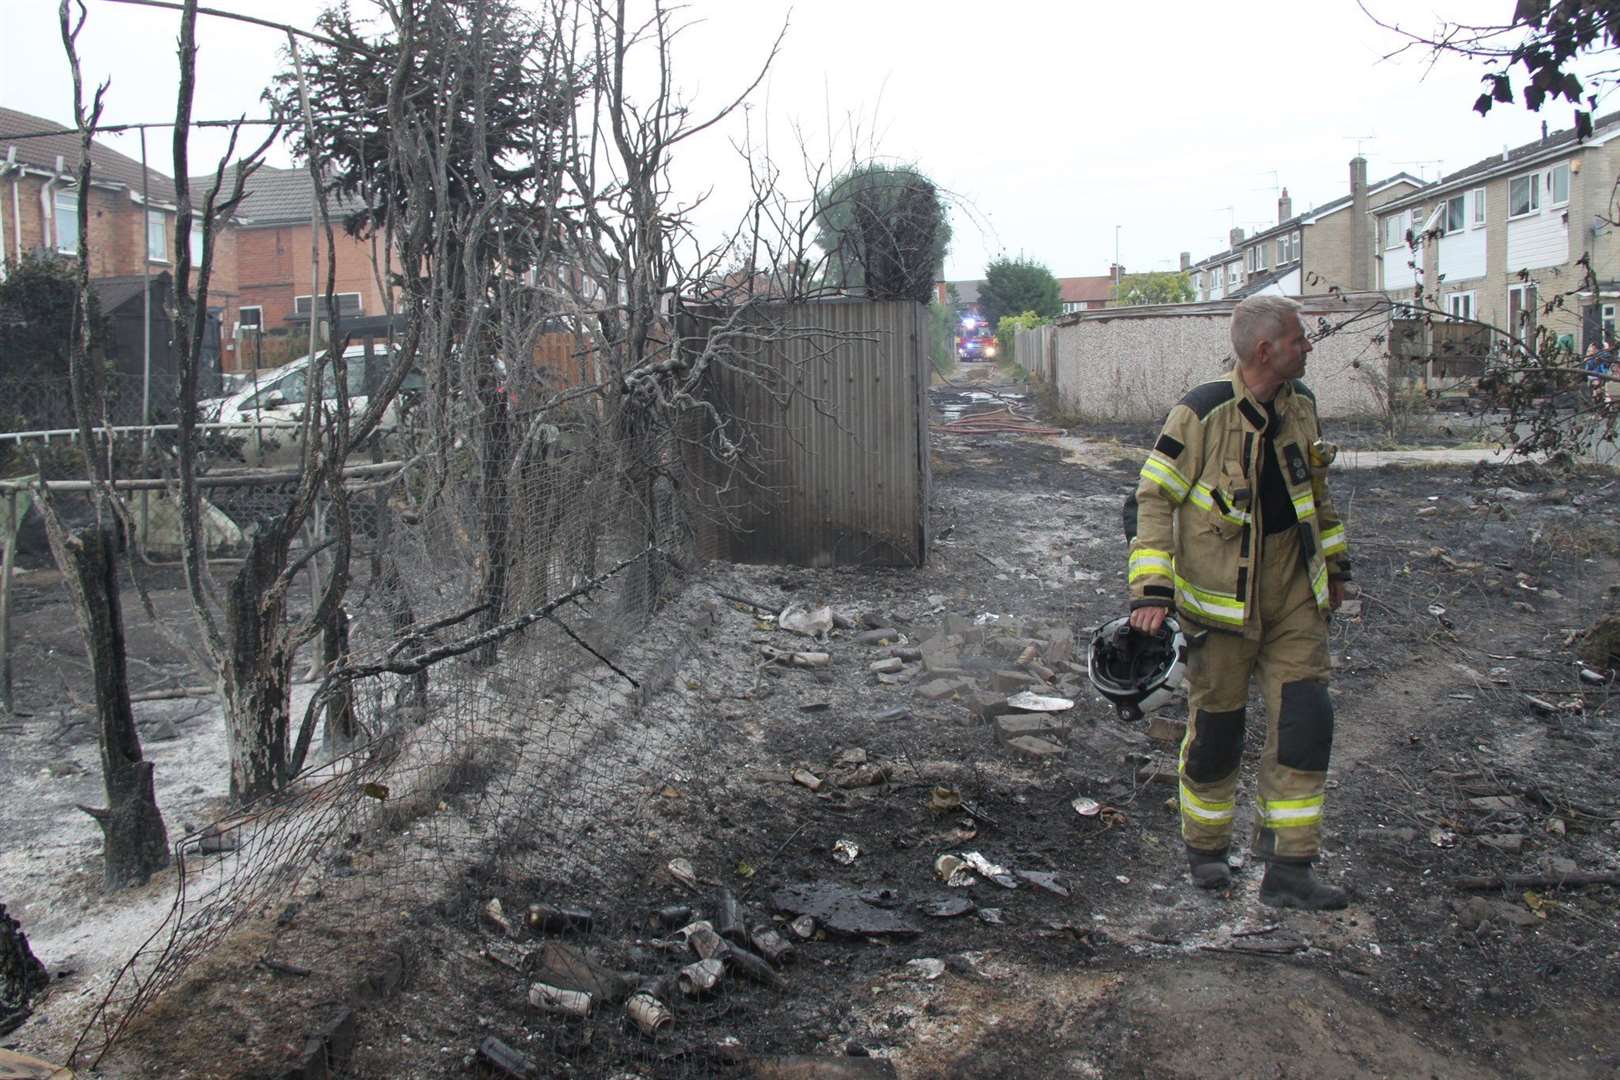 Firefighters in Maltby after a fire started on scrubland before spreading to outbuildings, fences and homes (South Yorkshire Fire and Rescue)